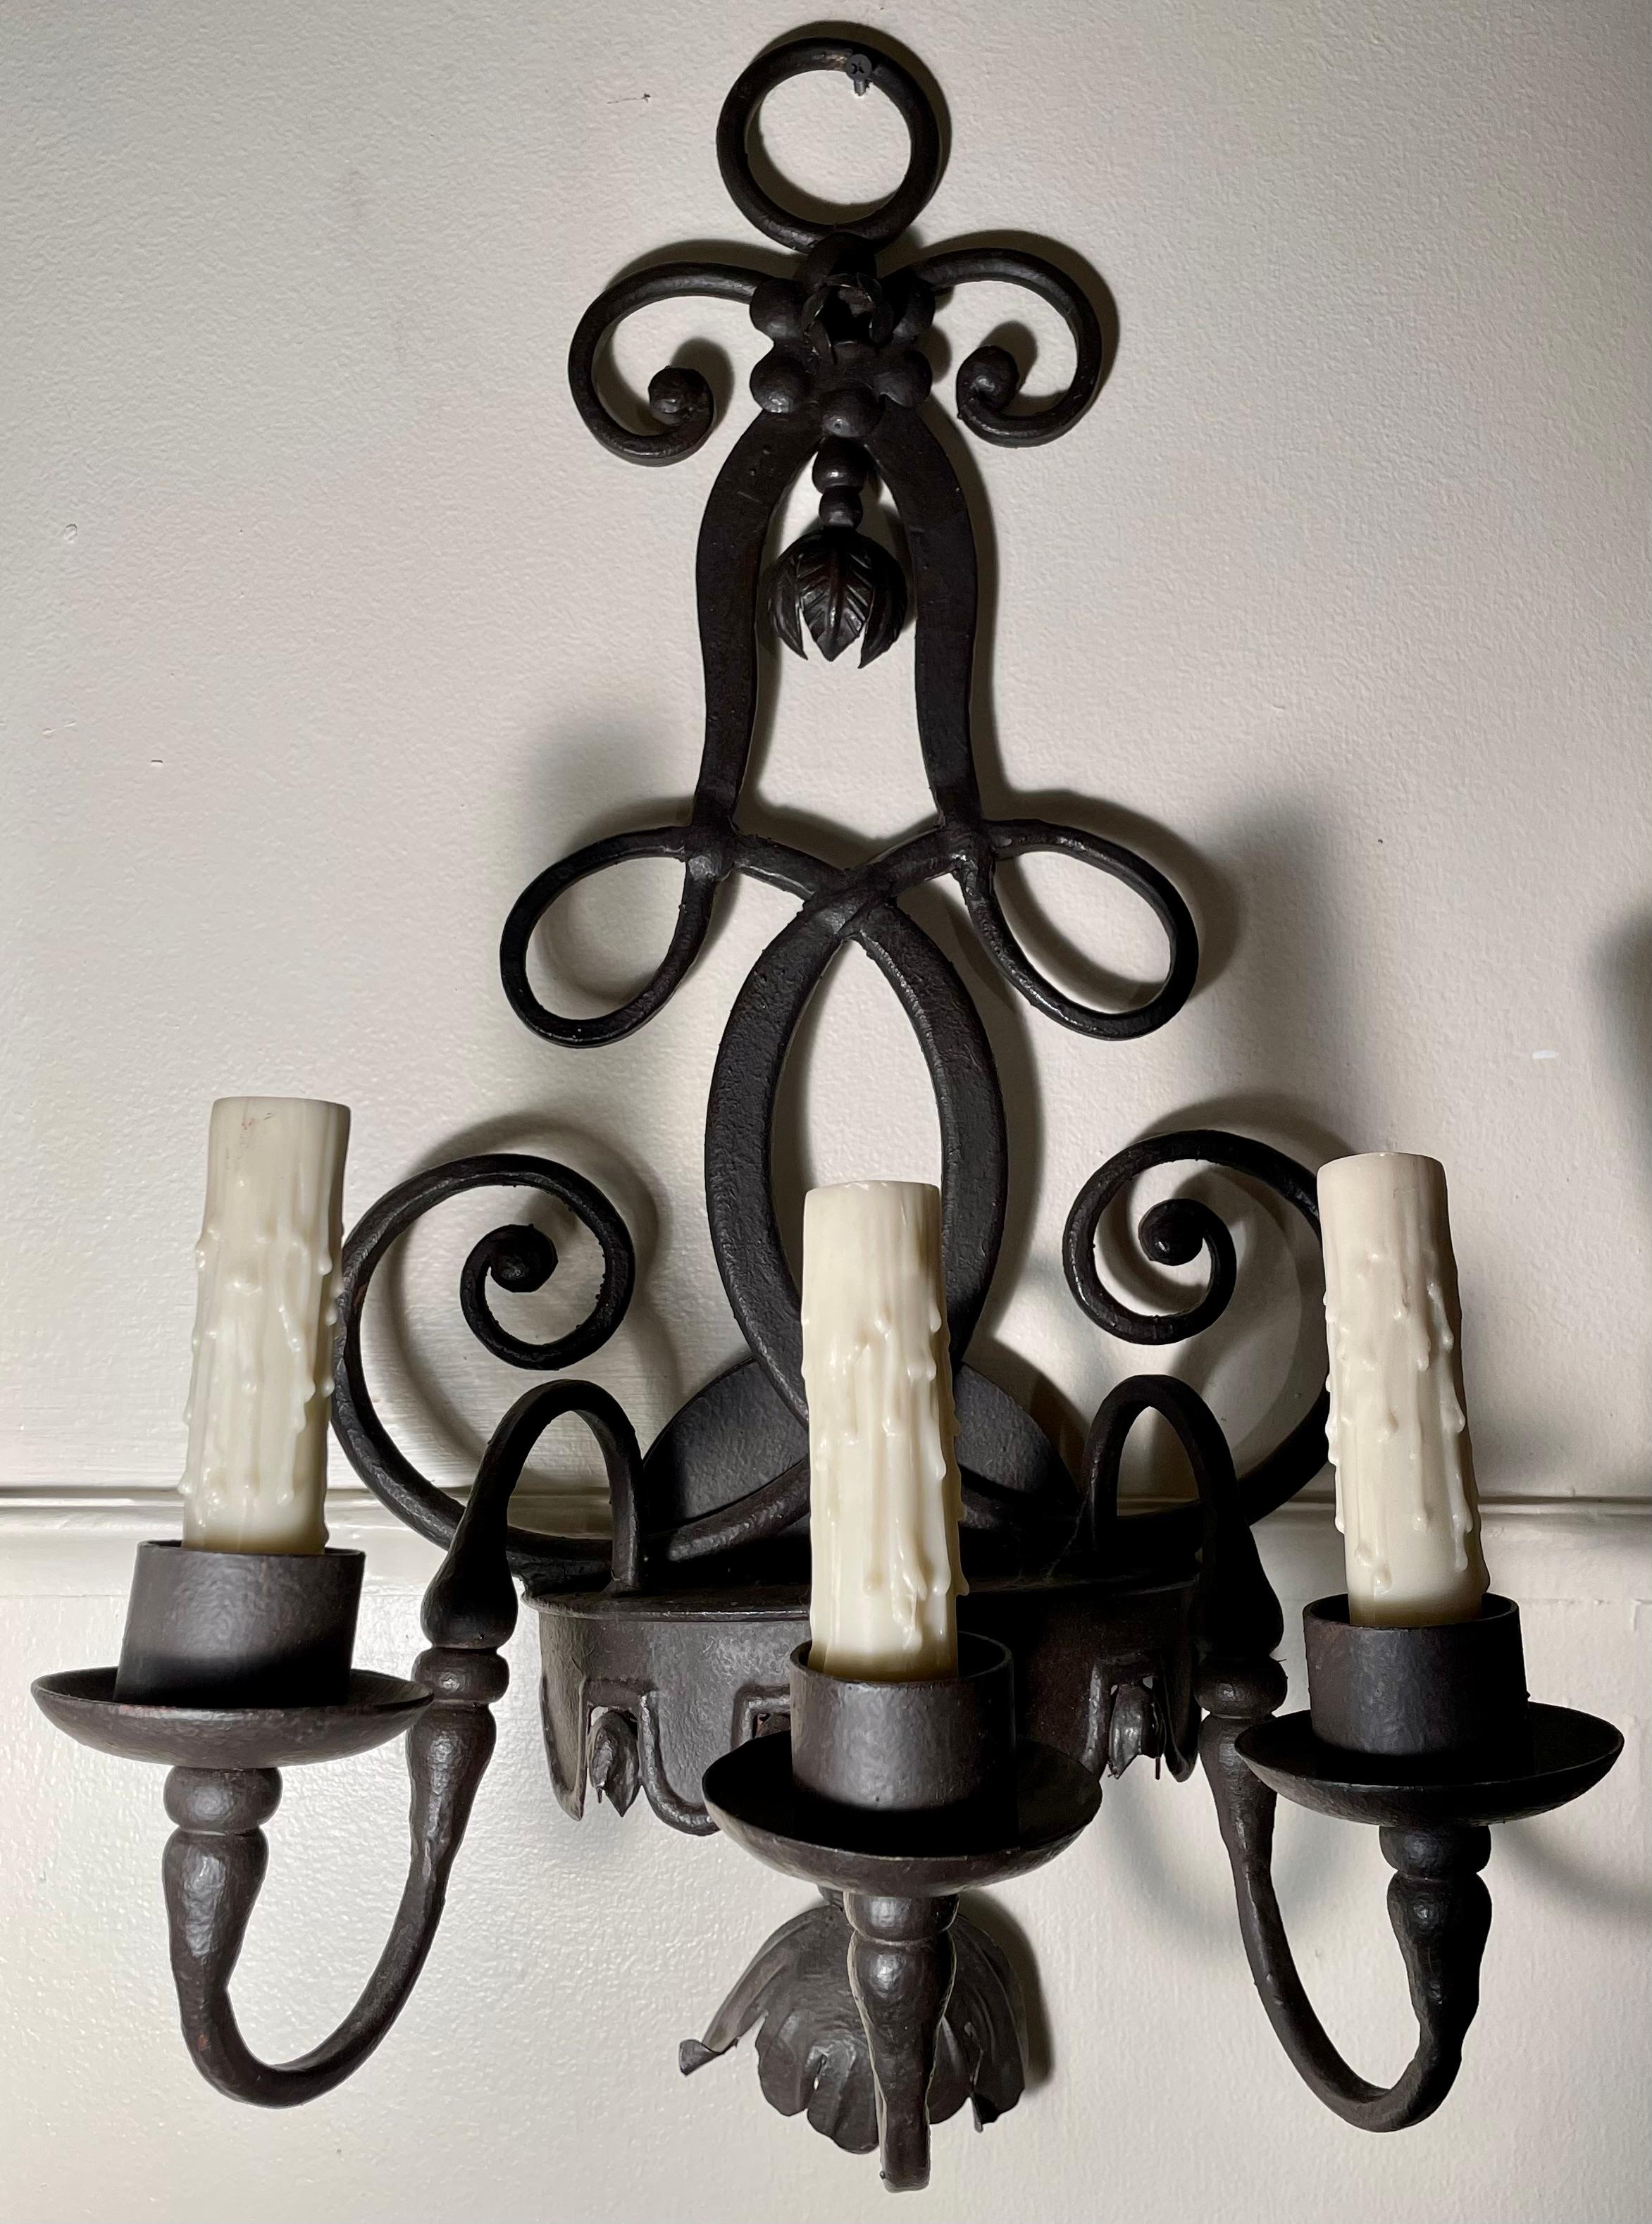 A nice pair of sconces with pleasing lines.